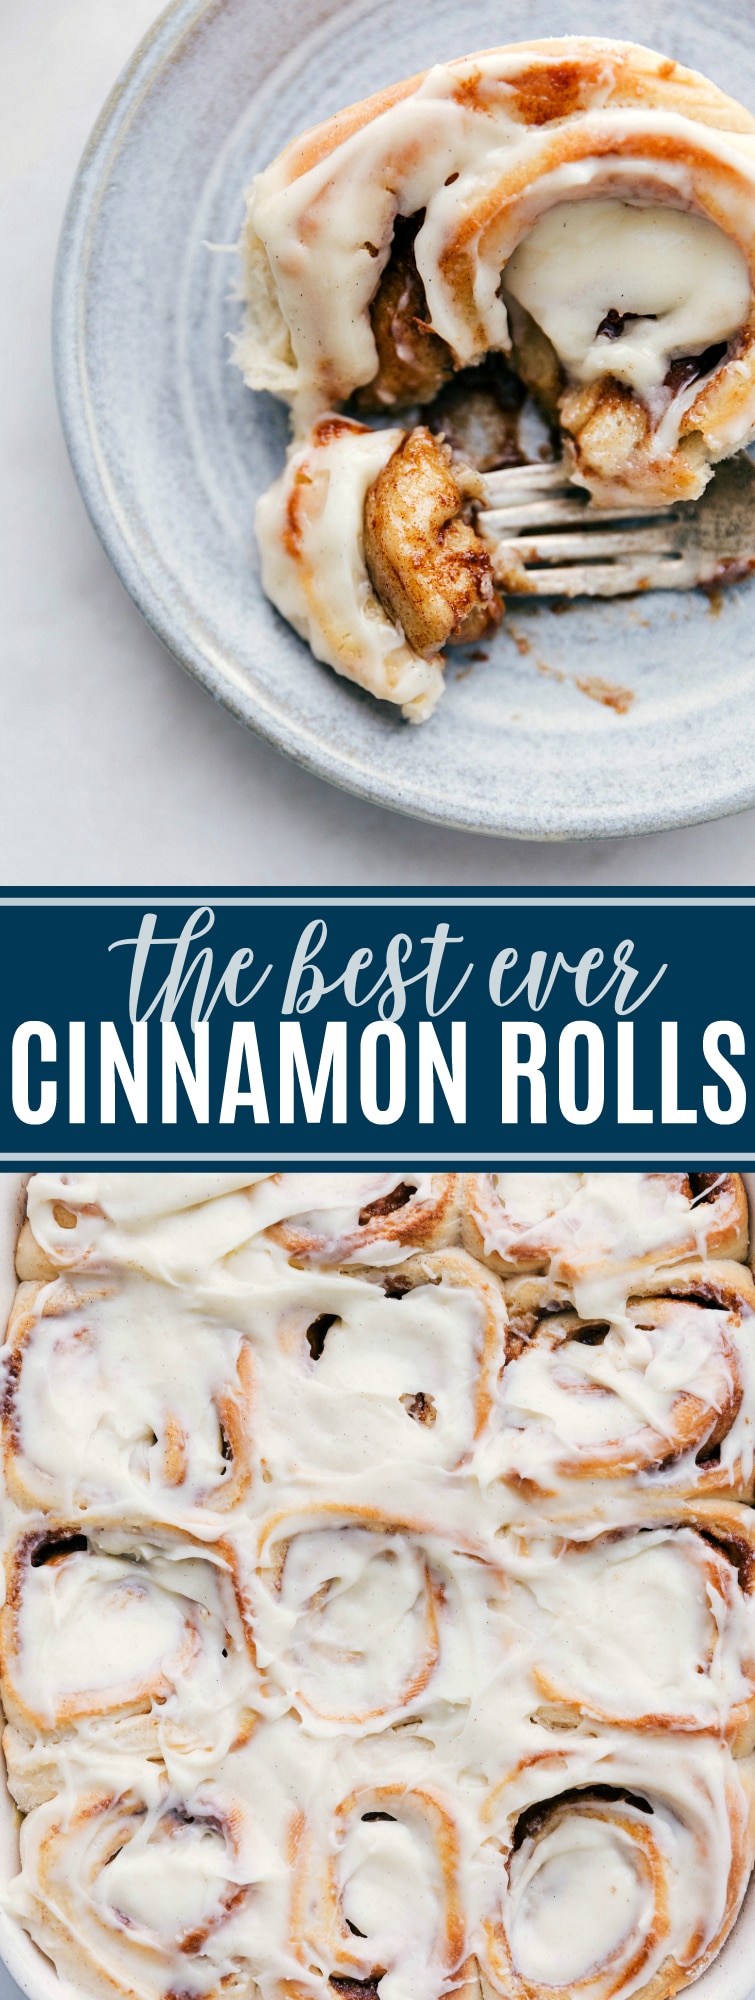 Delicious, gooey, & sweet homemade cinnamon rolls with step-by-step photos, detailed instructions, and all my top tips/tricks for perfect cinnamon rolls every single time. via chelseasmessyapron.com #homemade #cinnamon #roll #recipe #easy #delicious #recipe #christmas #breakfast #brunch #party #best